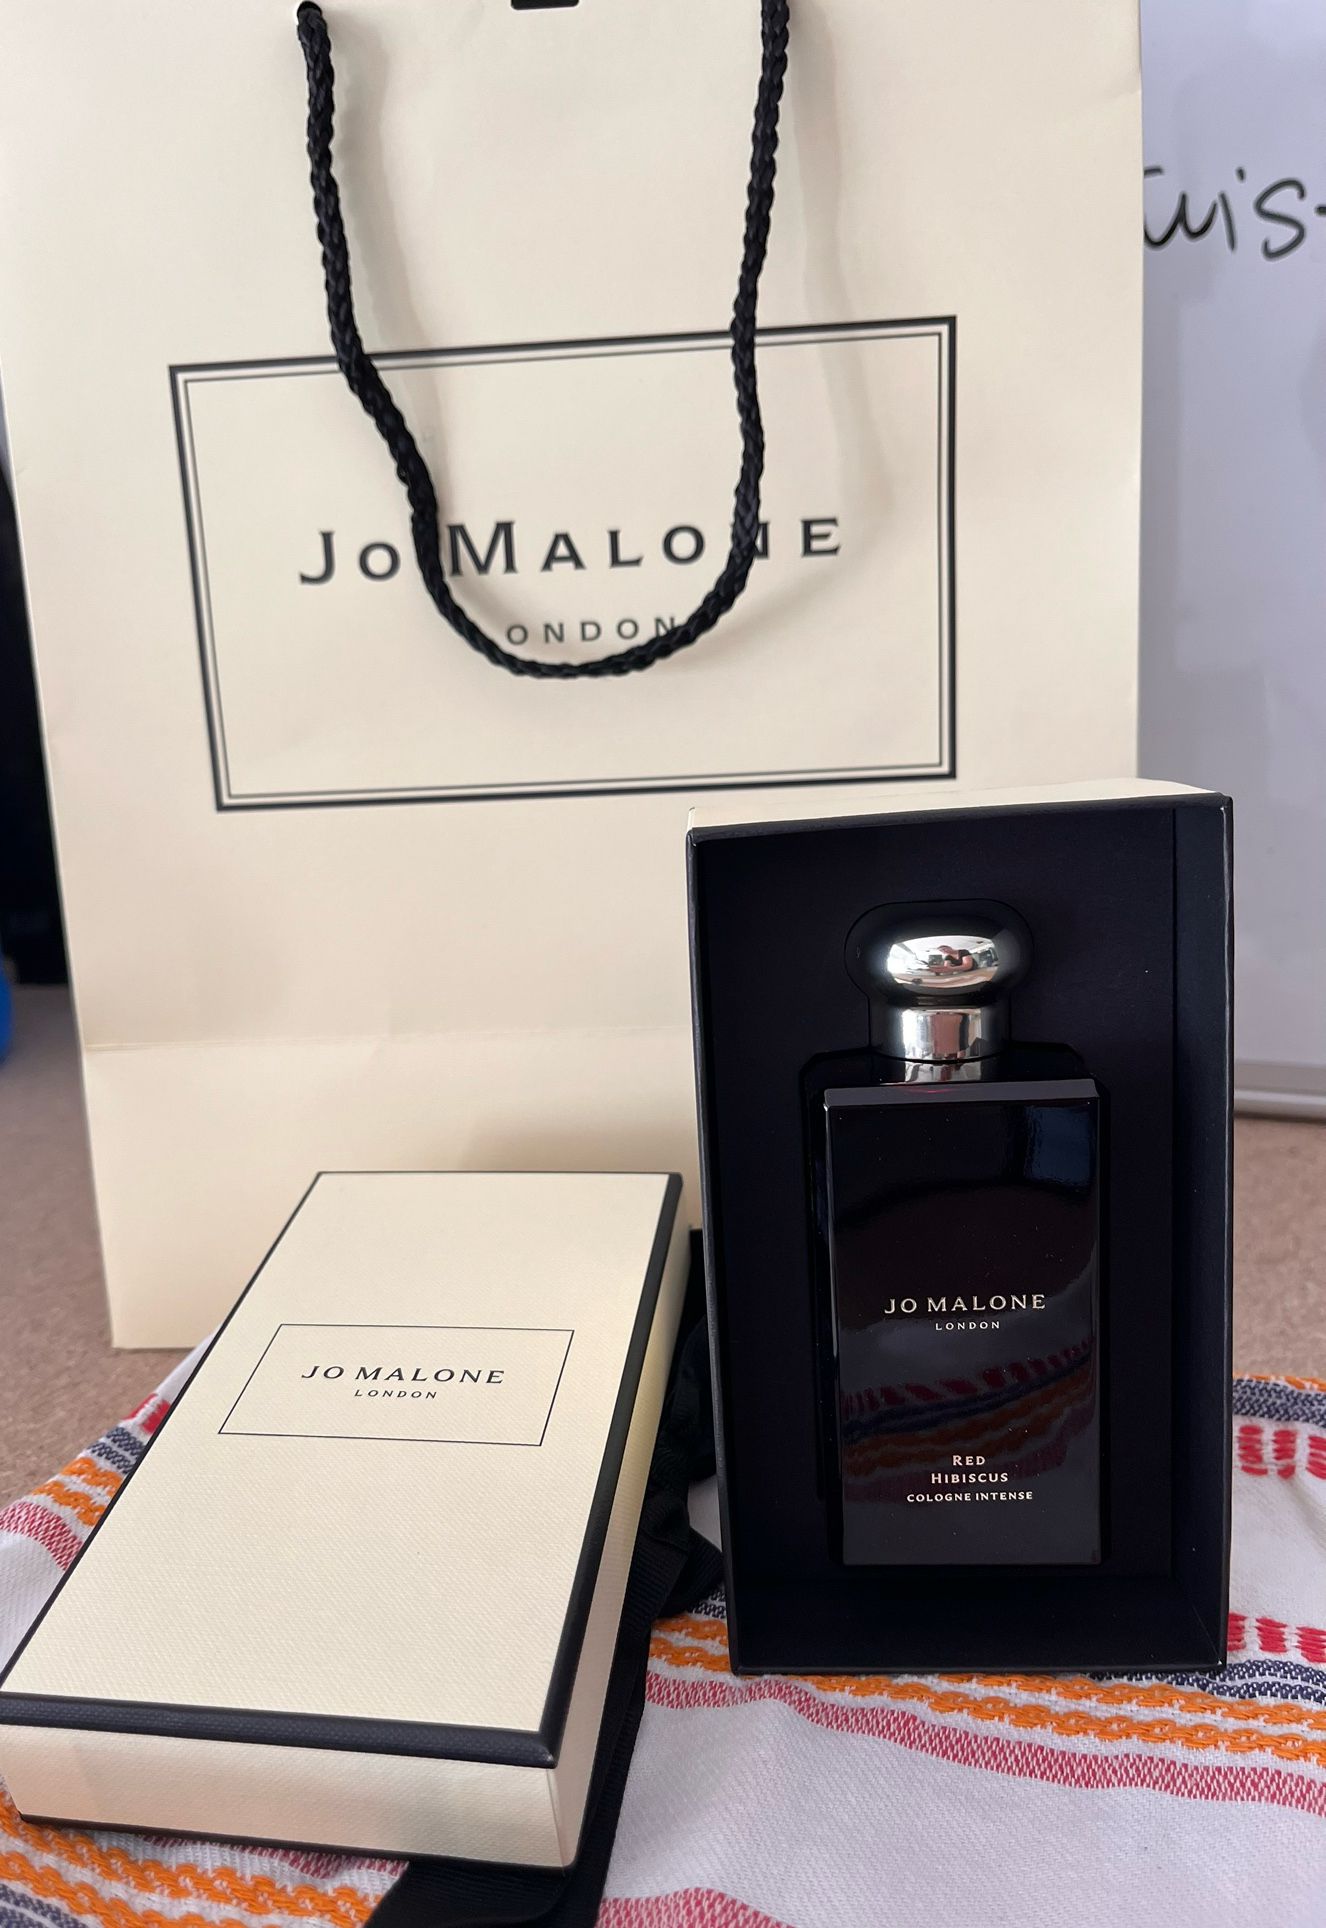 Jo Malone women’s cologne “Hibiscus”  Mother’s Day gift?